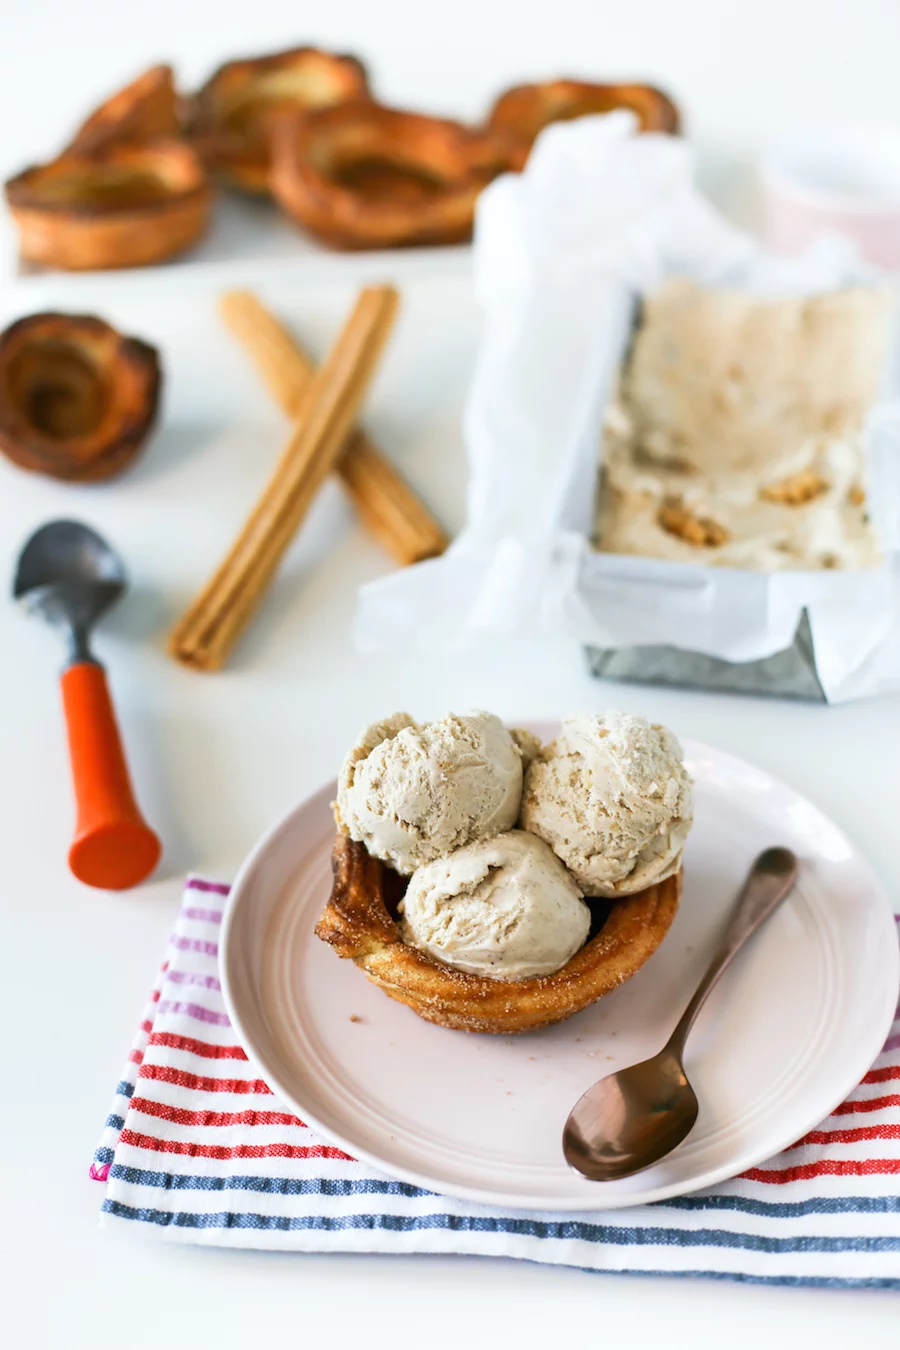 Go for churro overload and make this homemade Churro Ice Cream in homemade Churro Bowls! // Salty Canary